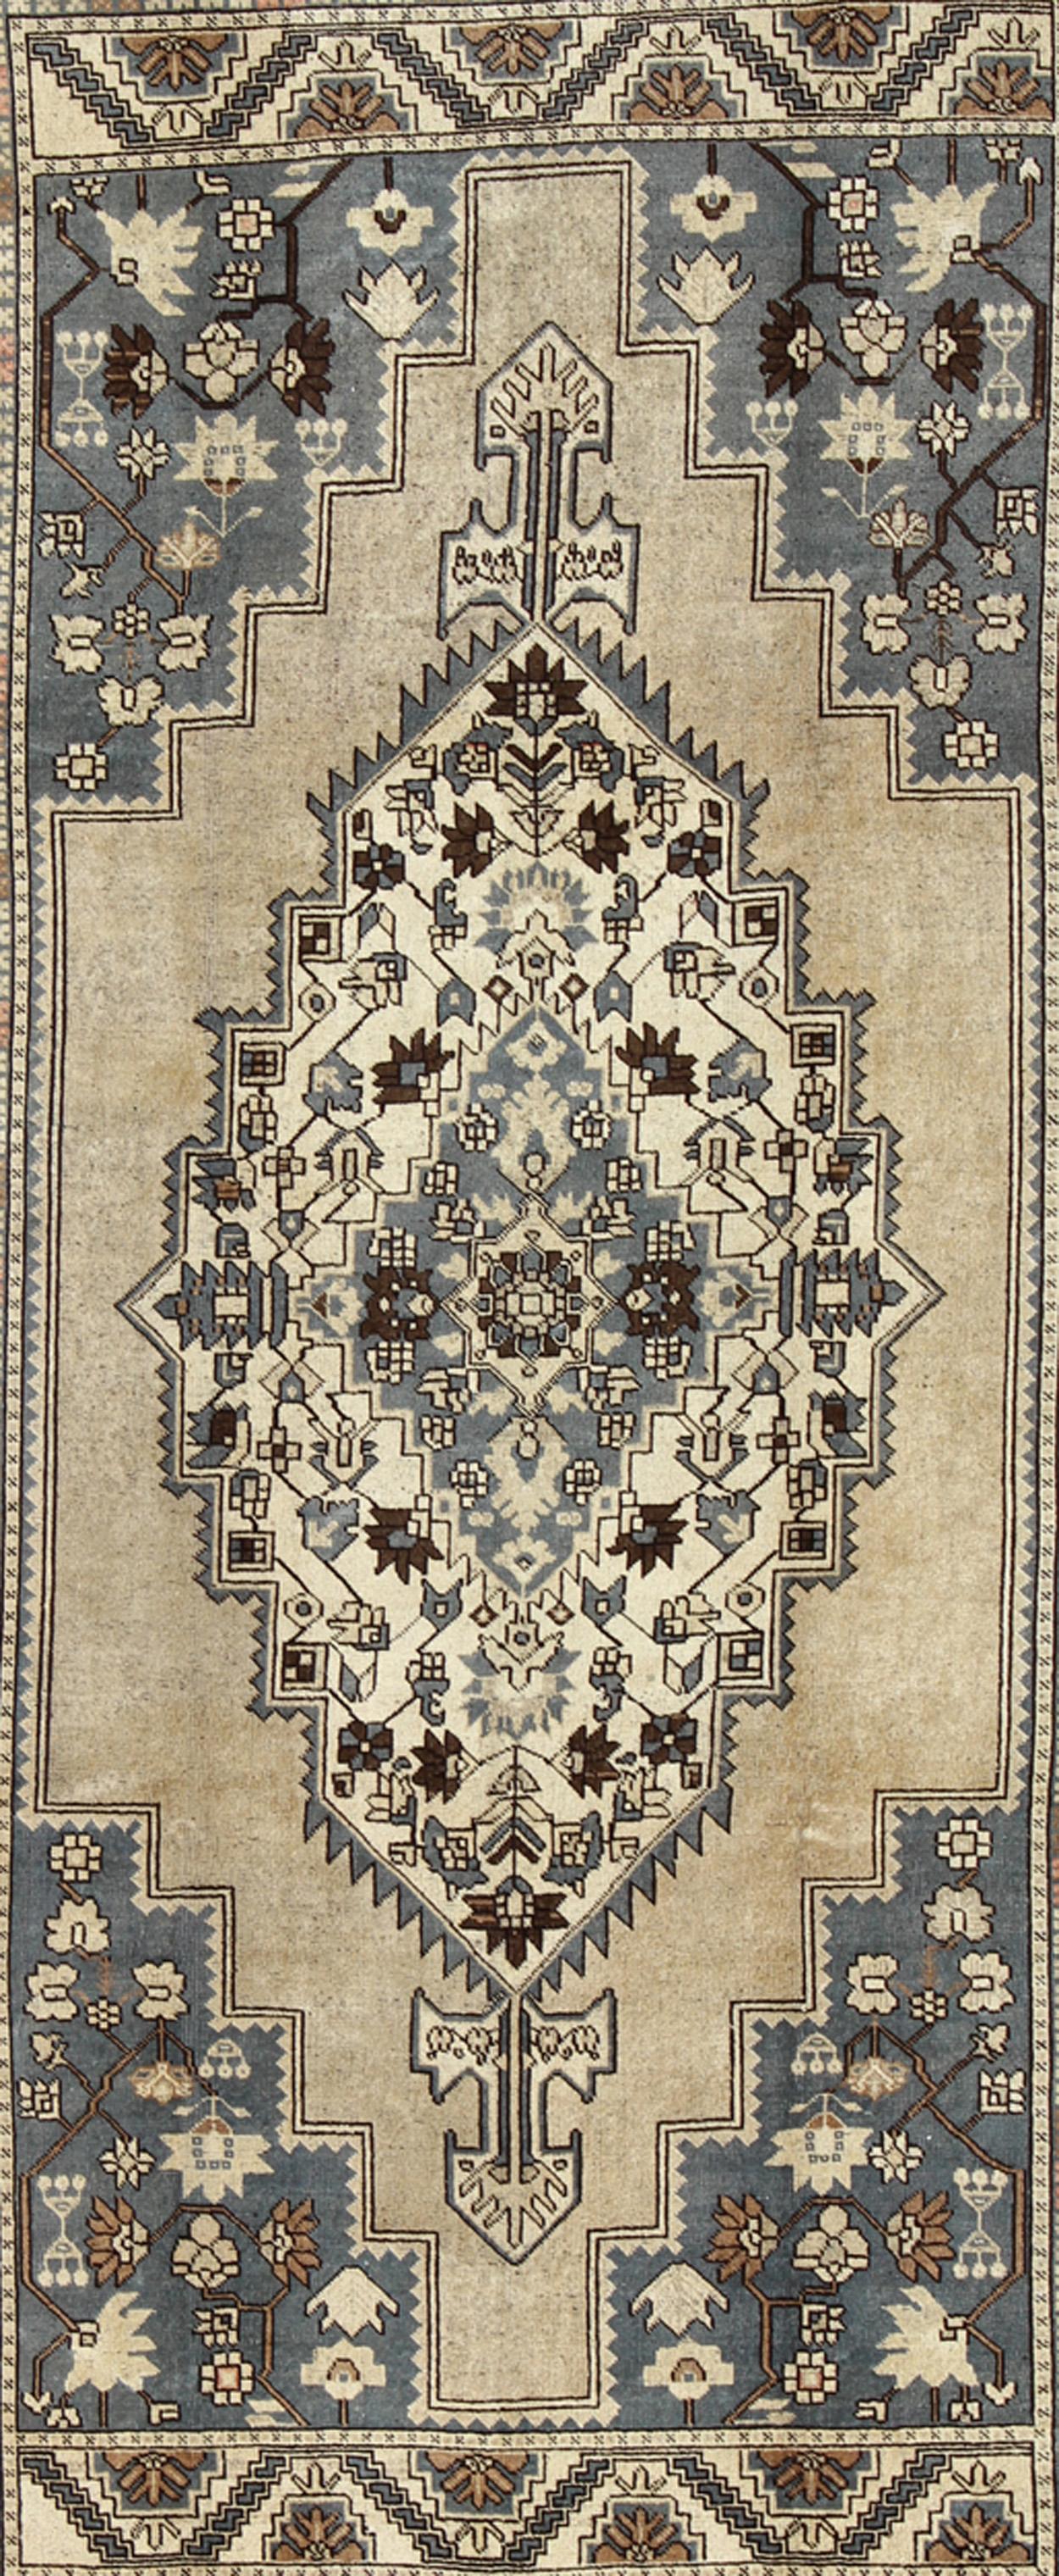 Measures: 7'2 x 12'9

Unique in its color palette and composition, this vintage Oushak features large-scale motifs and a central medallion. The field design is rendered in muddy blue, sandy taupe, chocolate brown, and cream. The wide-band mocha